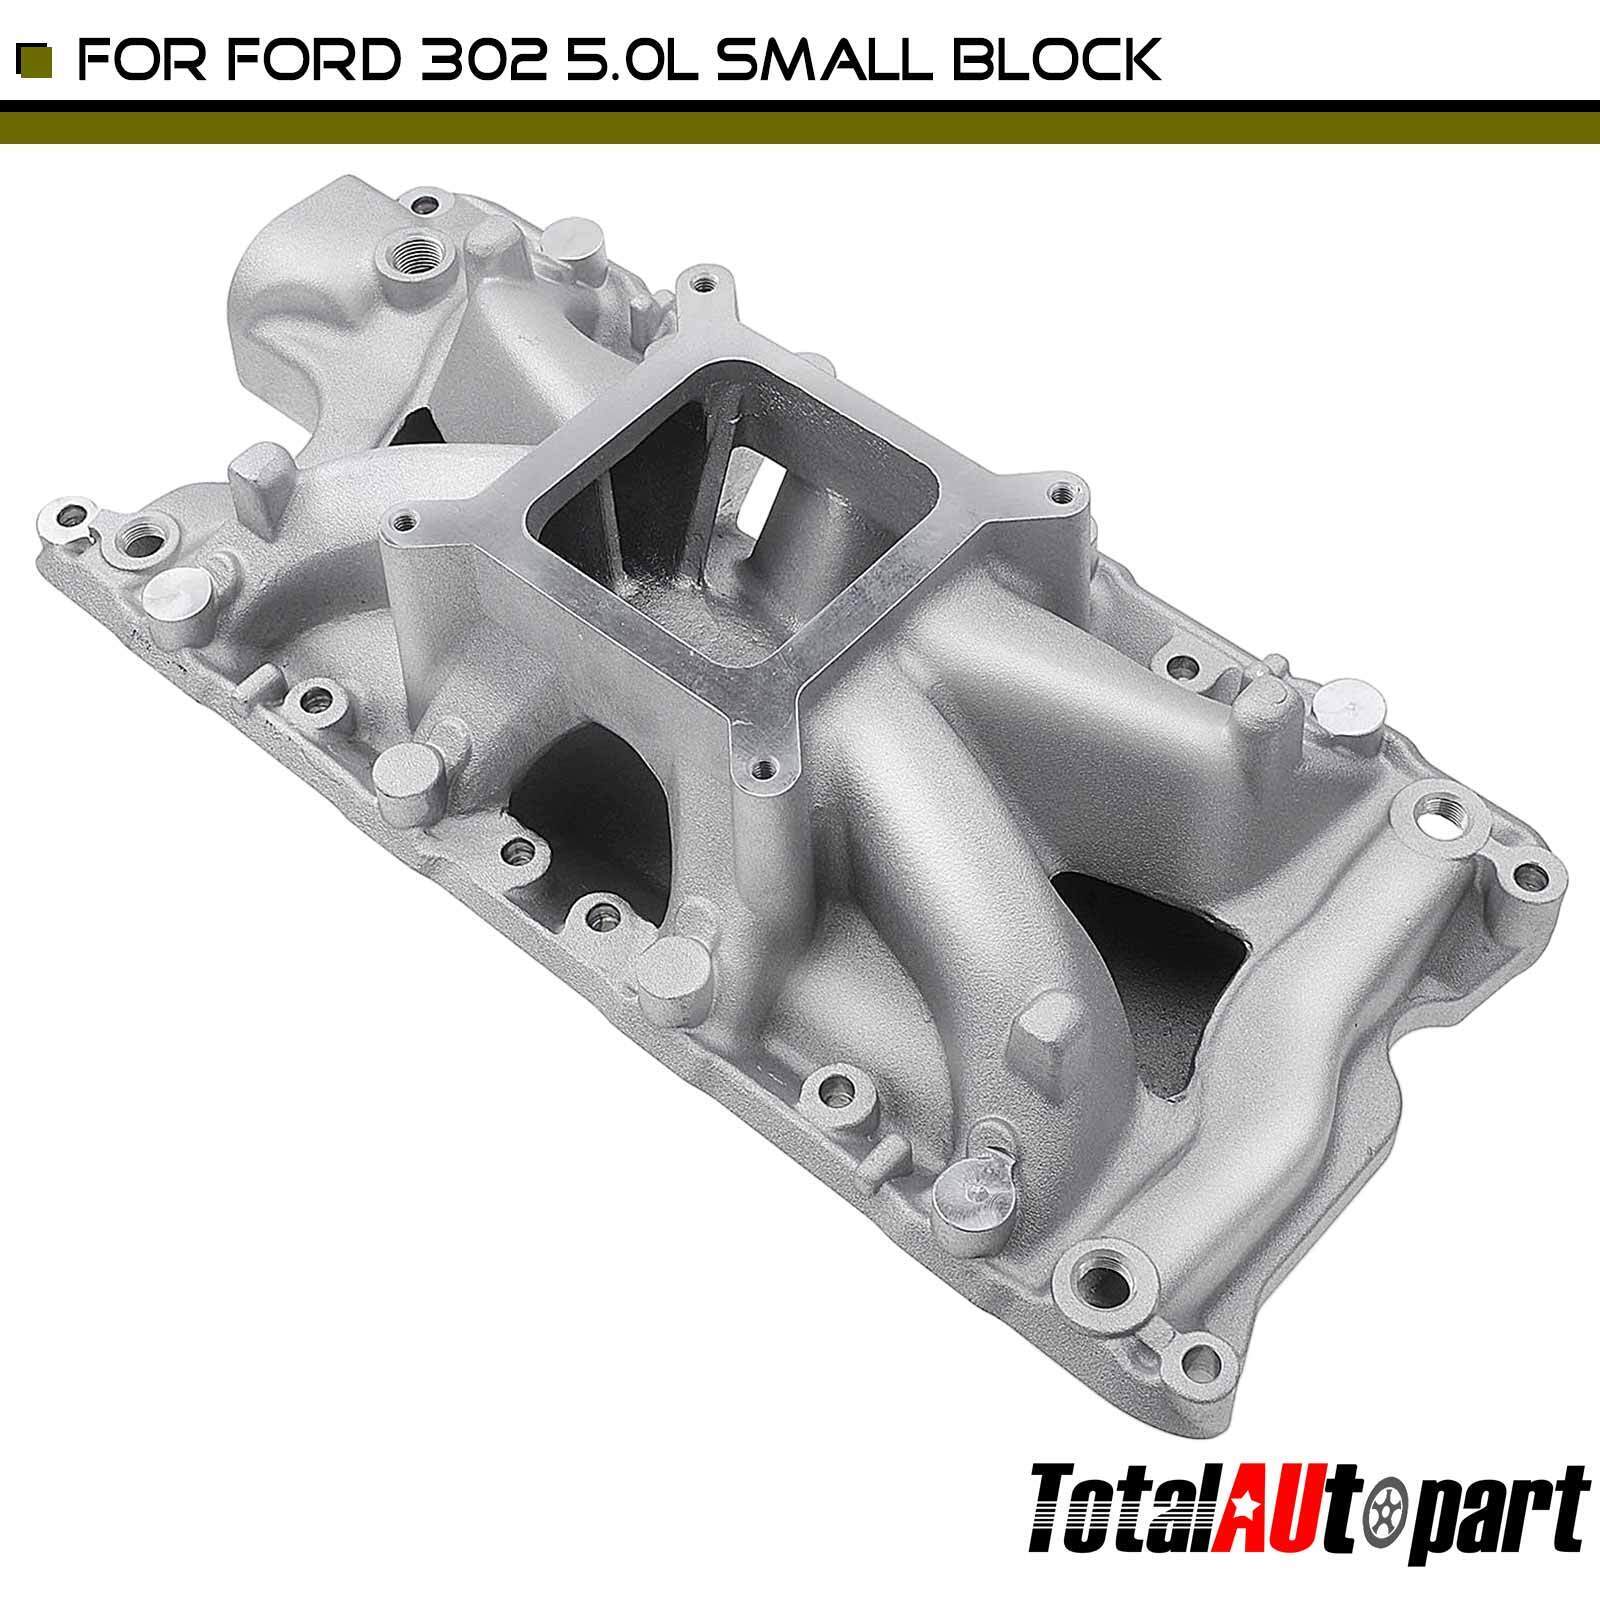 High Rise Single Plane Intake Manifold for Ford 302 Small Block Aluminum 5.0L